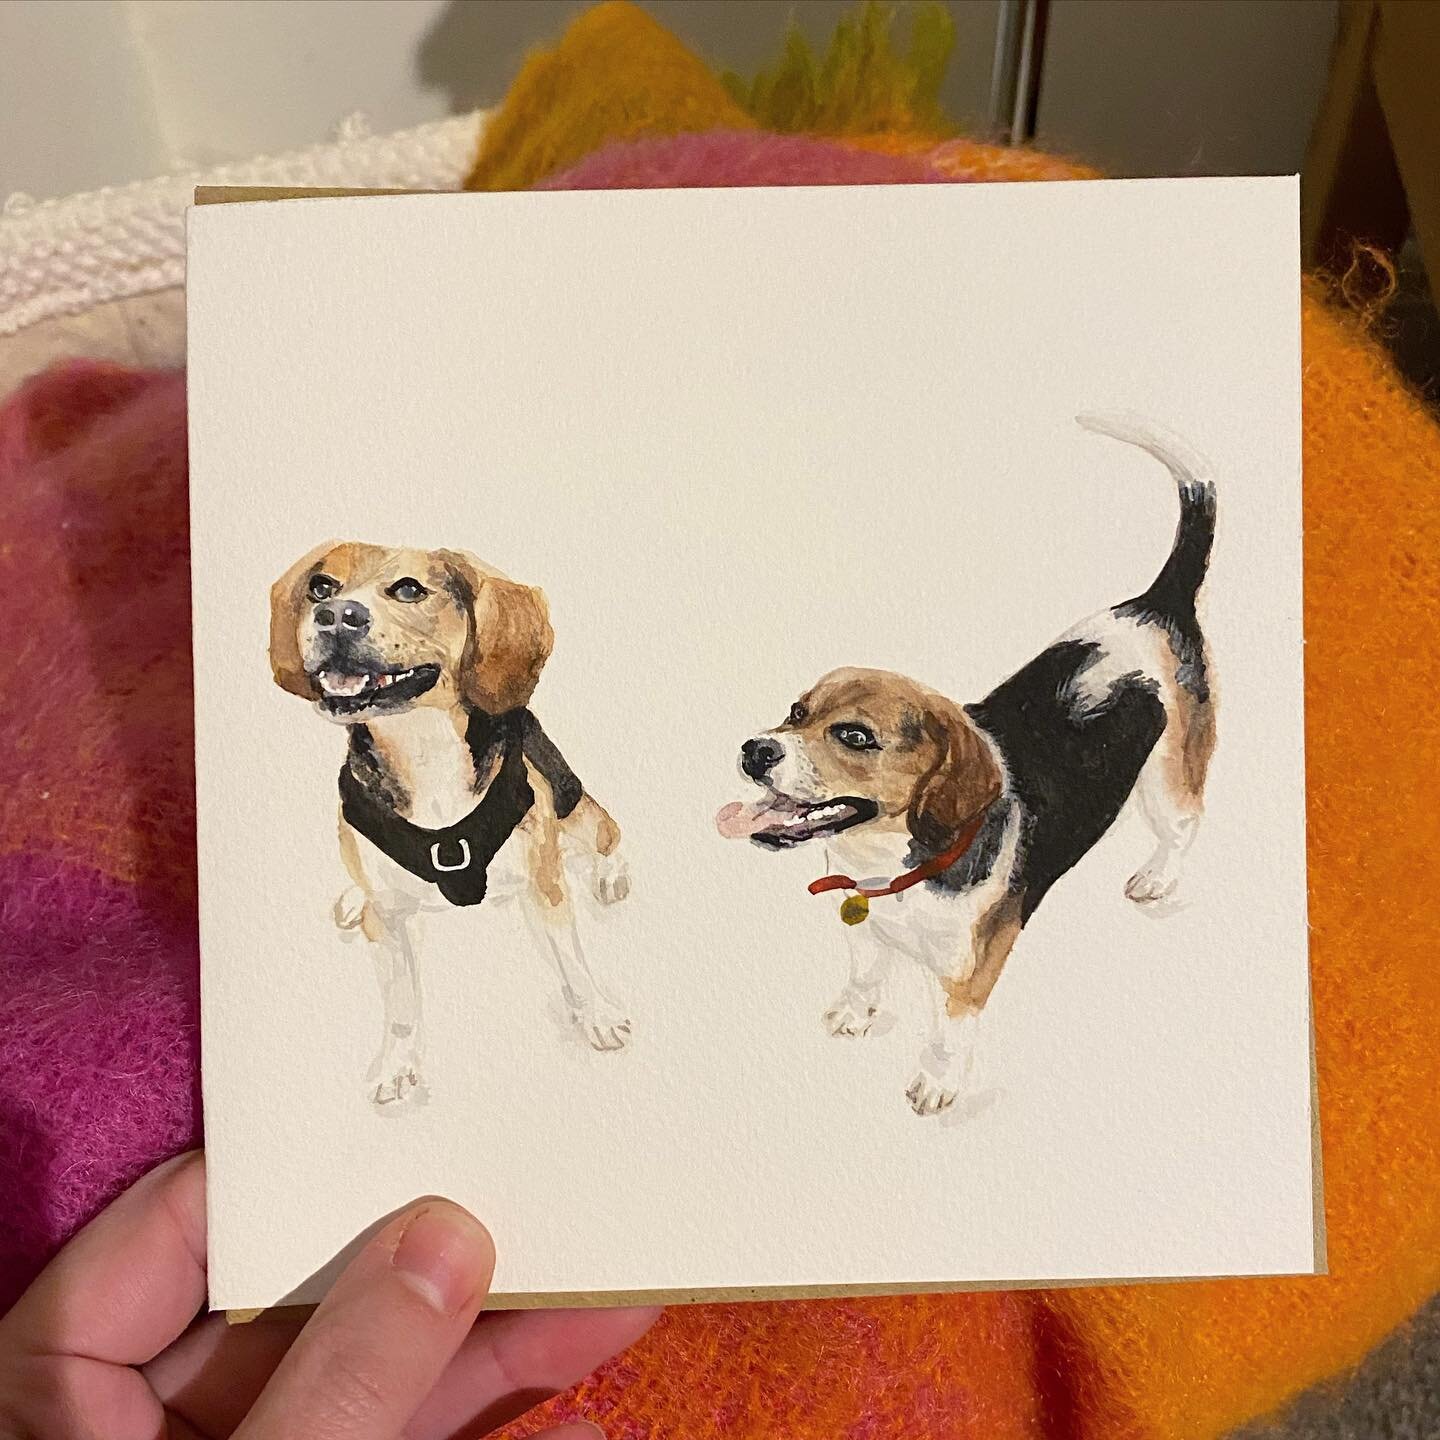 First day back to &lsquo;normal&rsquo; and sharing one of my festive commissions painted in December 🐾 
Hope you have a good start to your week.
.
.
.
.
.
.
#watercolorpainting #petportrait #beaglelove #beaglegram #artistsoninstagram #illustration #